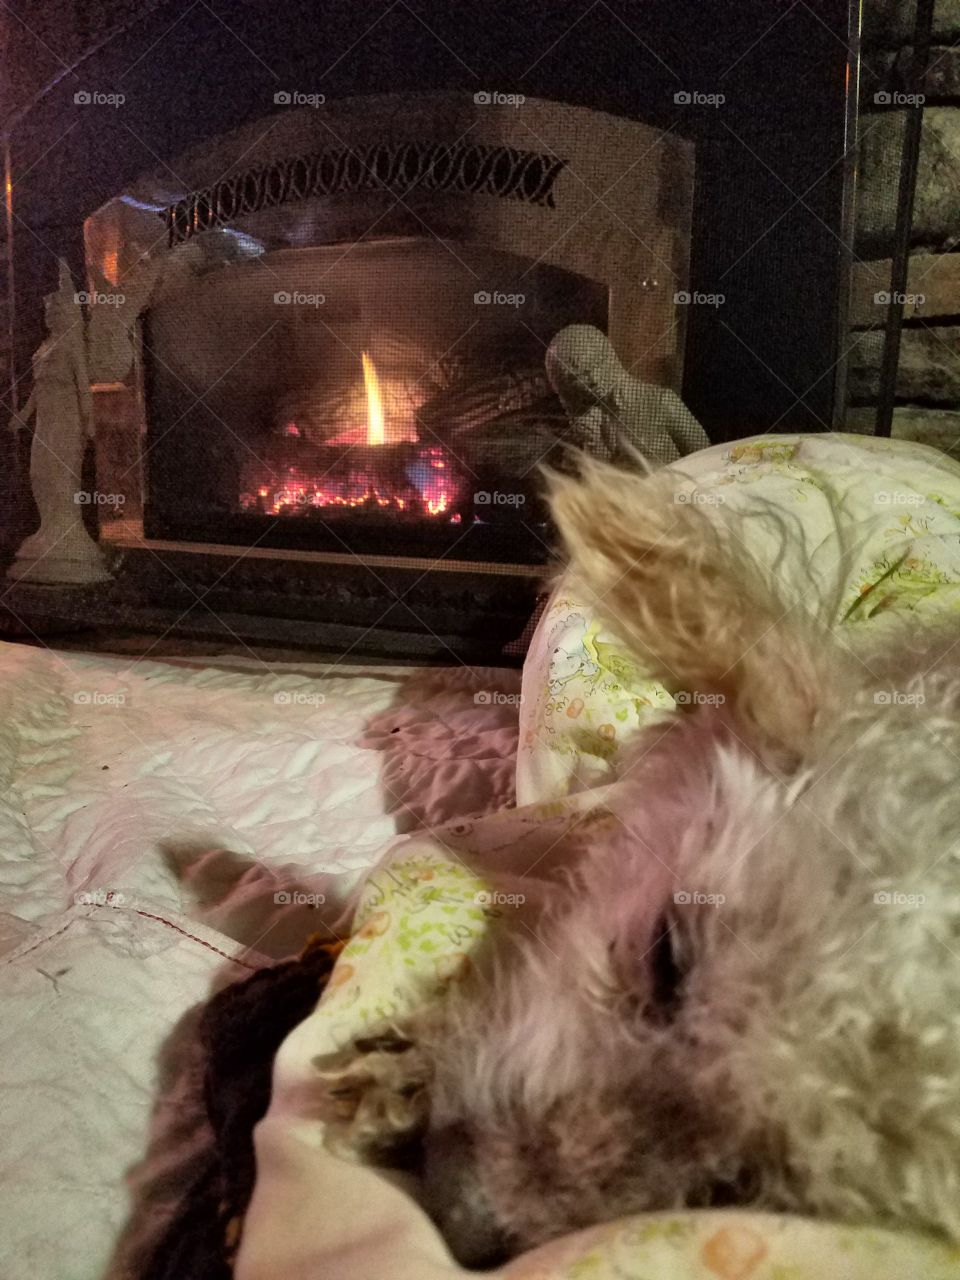 Dog sleeping in front of burning fireplace, floor level pic of poodles face.